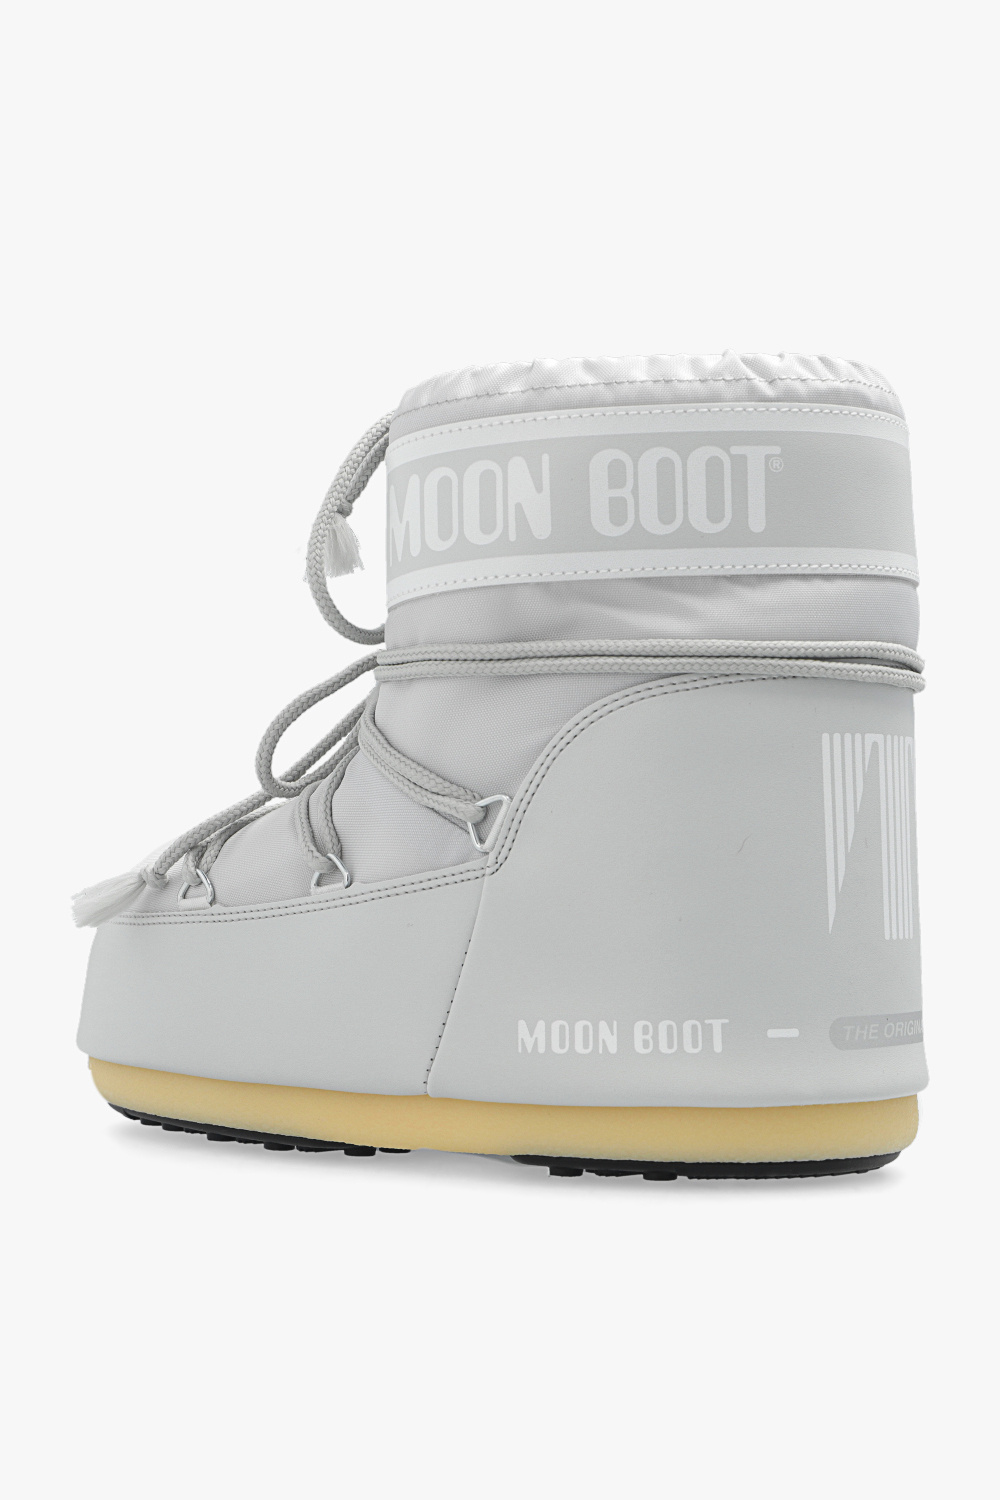 Moon Boot ‘Icon Low’ dc8466-250 boots